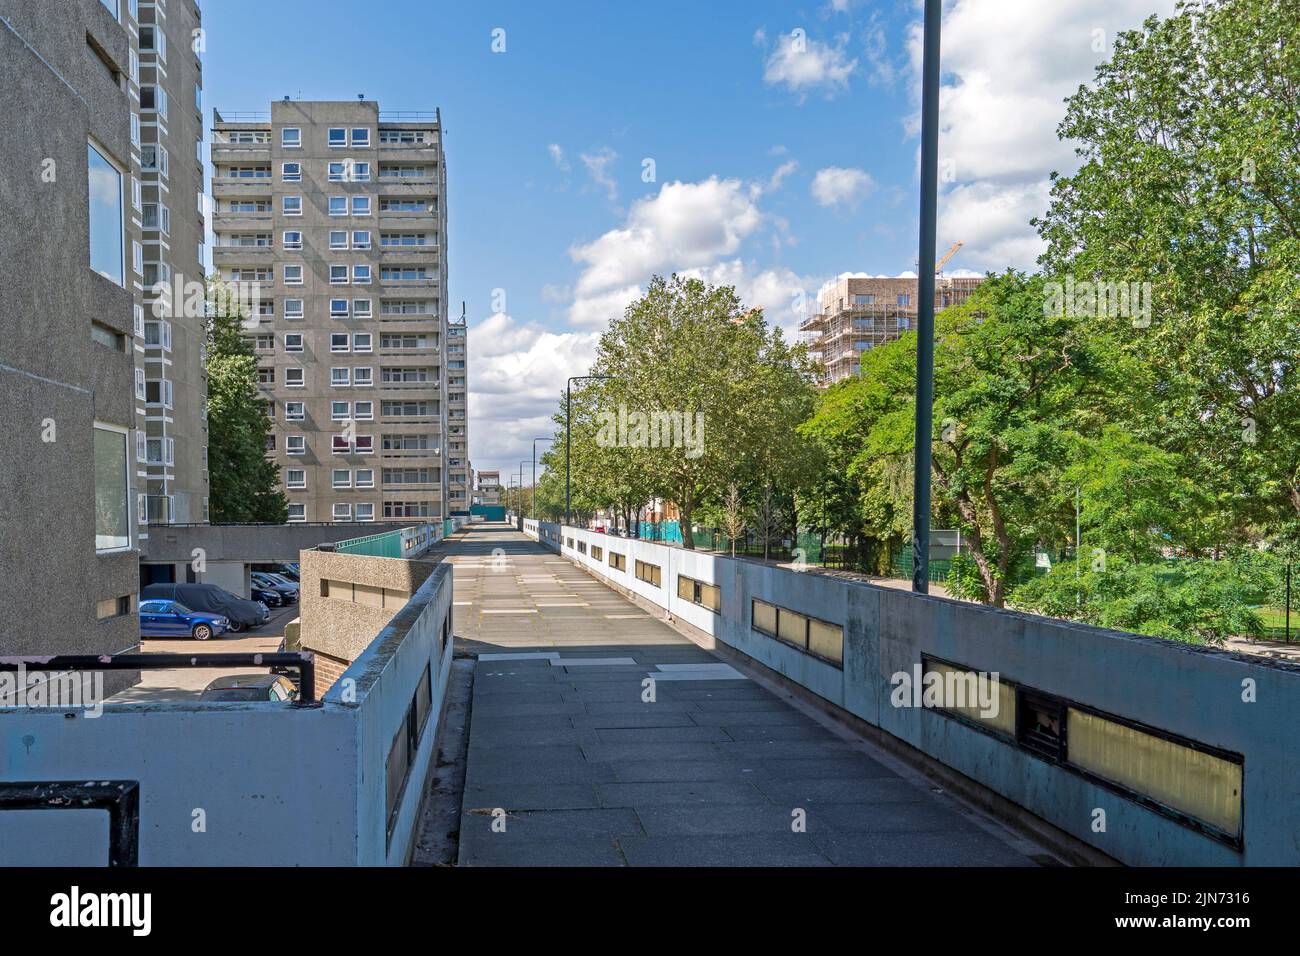 Thamesmead social housing estate in South East London currently undergoing redevelopment. England, UK. Stock Photo